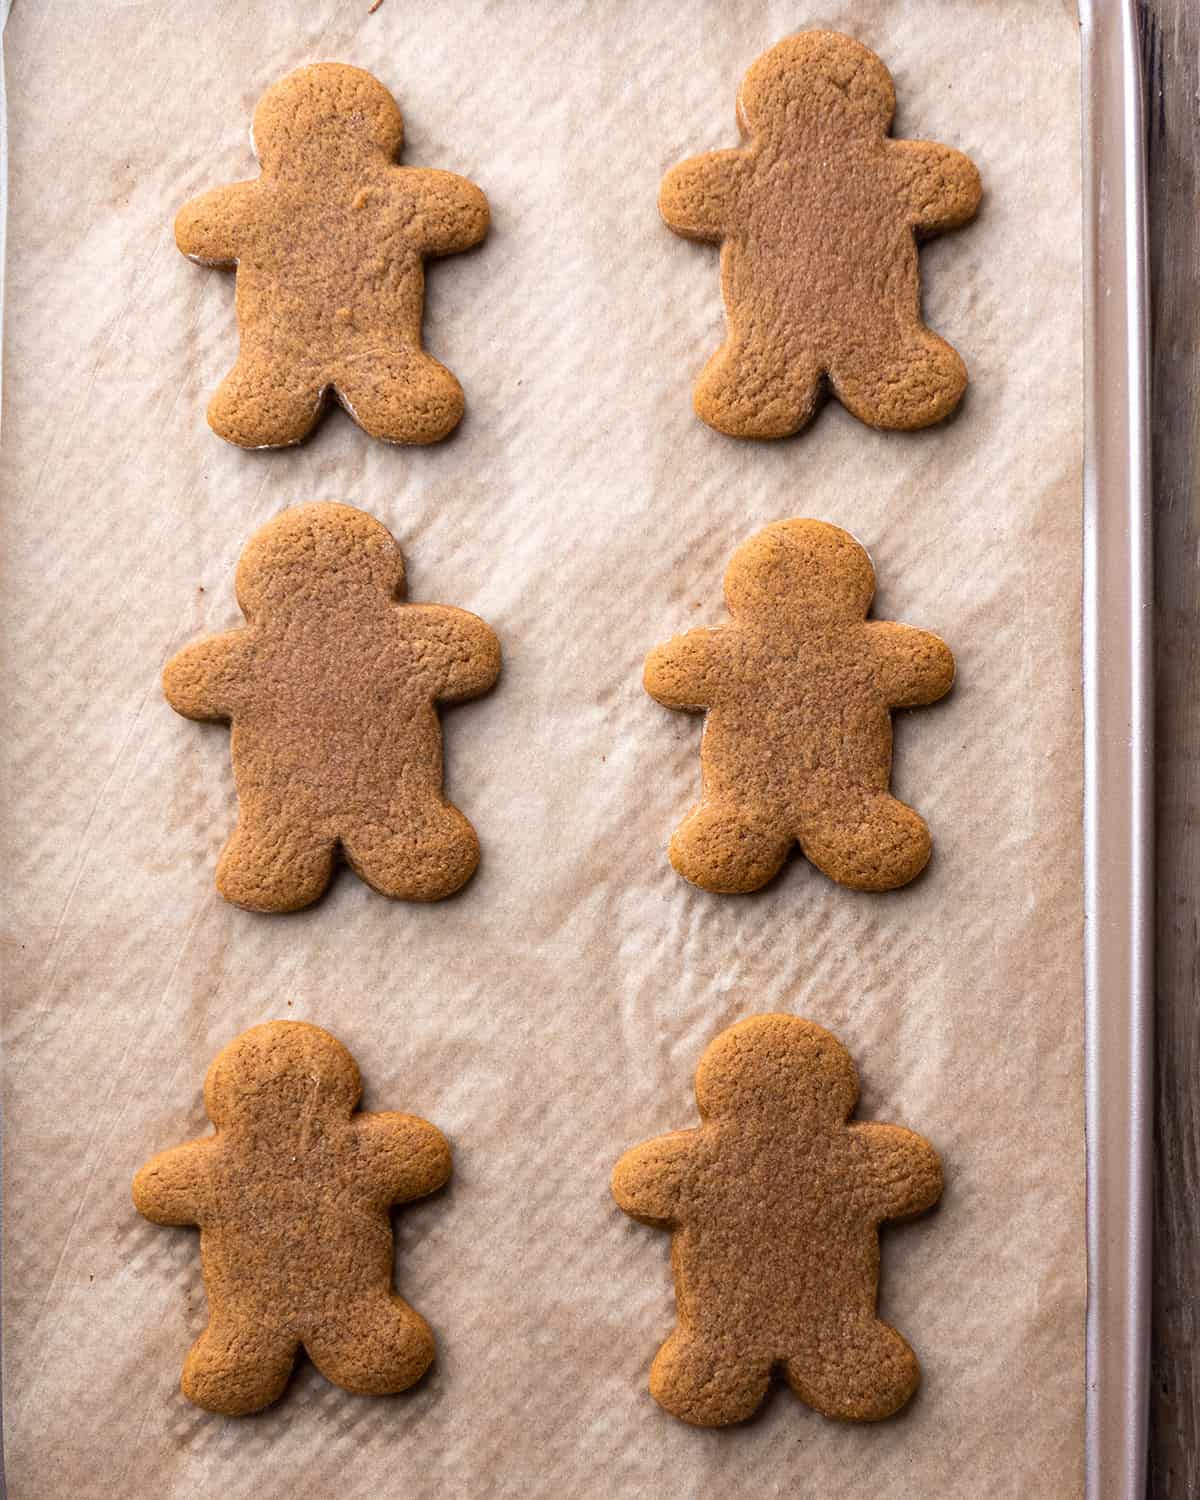 How to Make Gingerbread Men - cut out gingerbread men on a baking sheet before baking